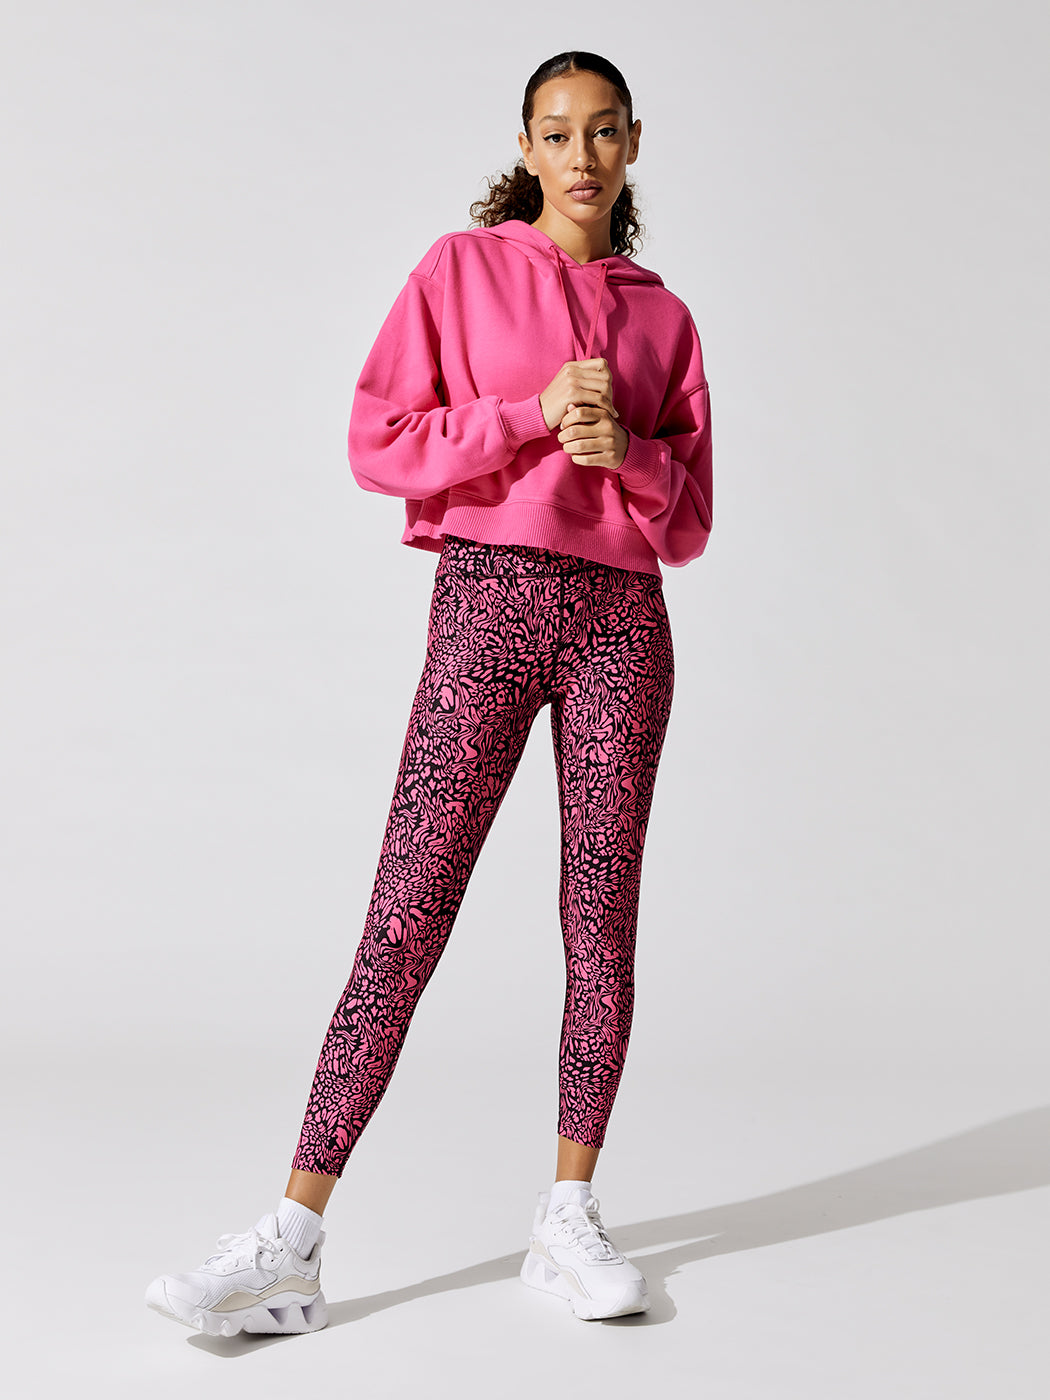 https://carbon38.com/cdn/shop/products/CARB-CRB21409B-LEOPIN-swirly-leopard-printed-7-8-legging-Color-ELECTRIC-PINK-SWIRLY-LEOPARD_a44ec29e-a2f3-404d-80e0-352f2b2d7356.jpg?v=1661320155